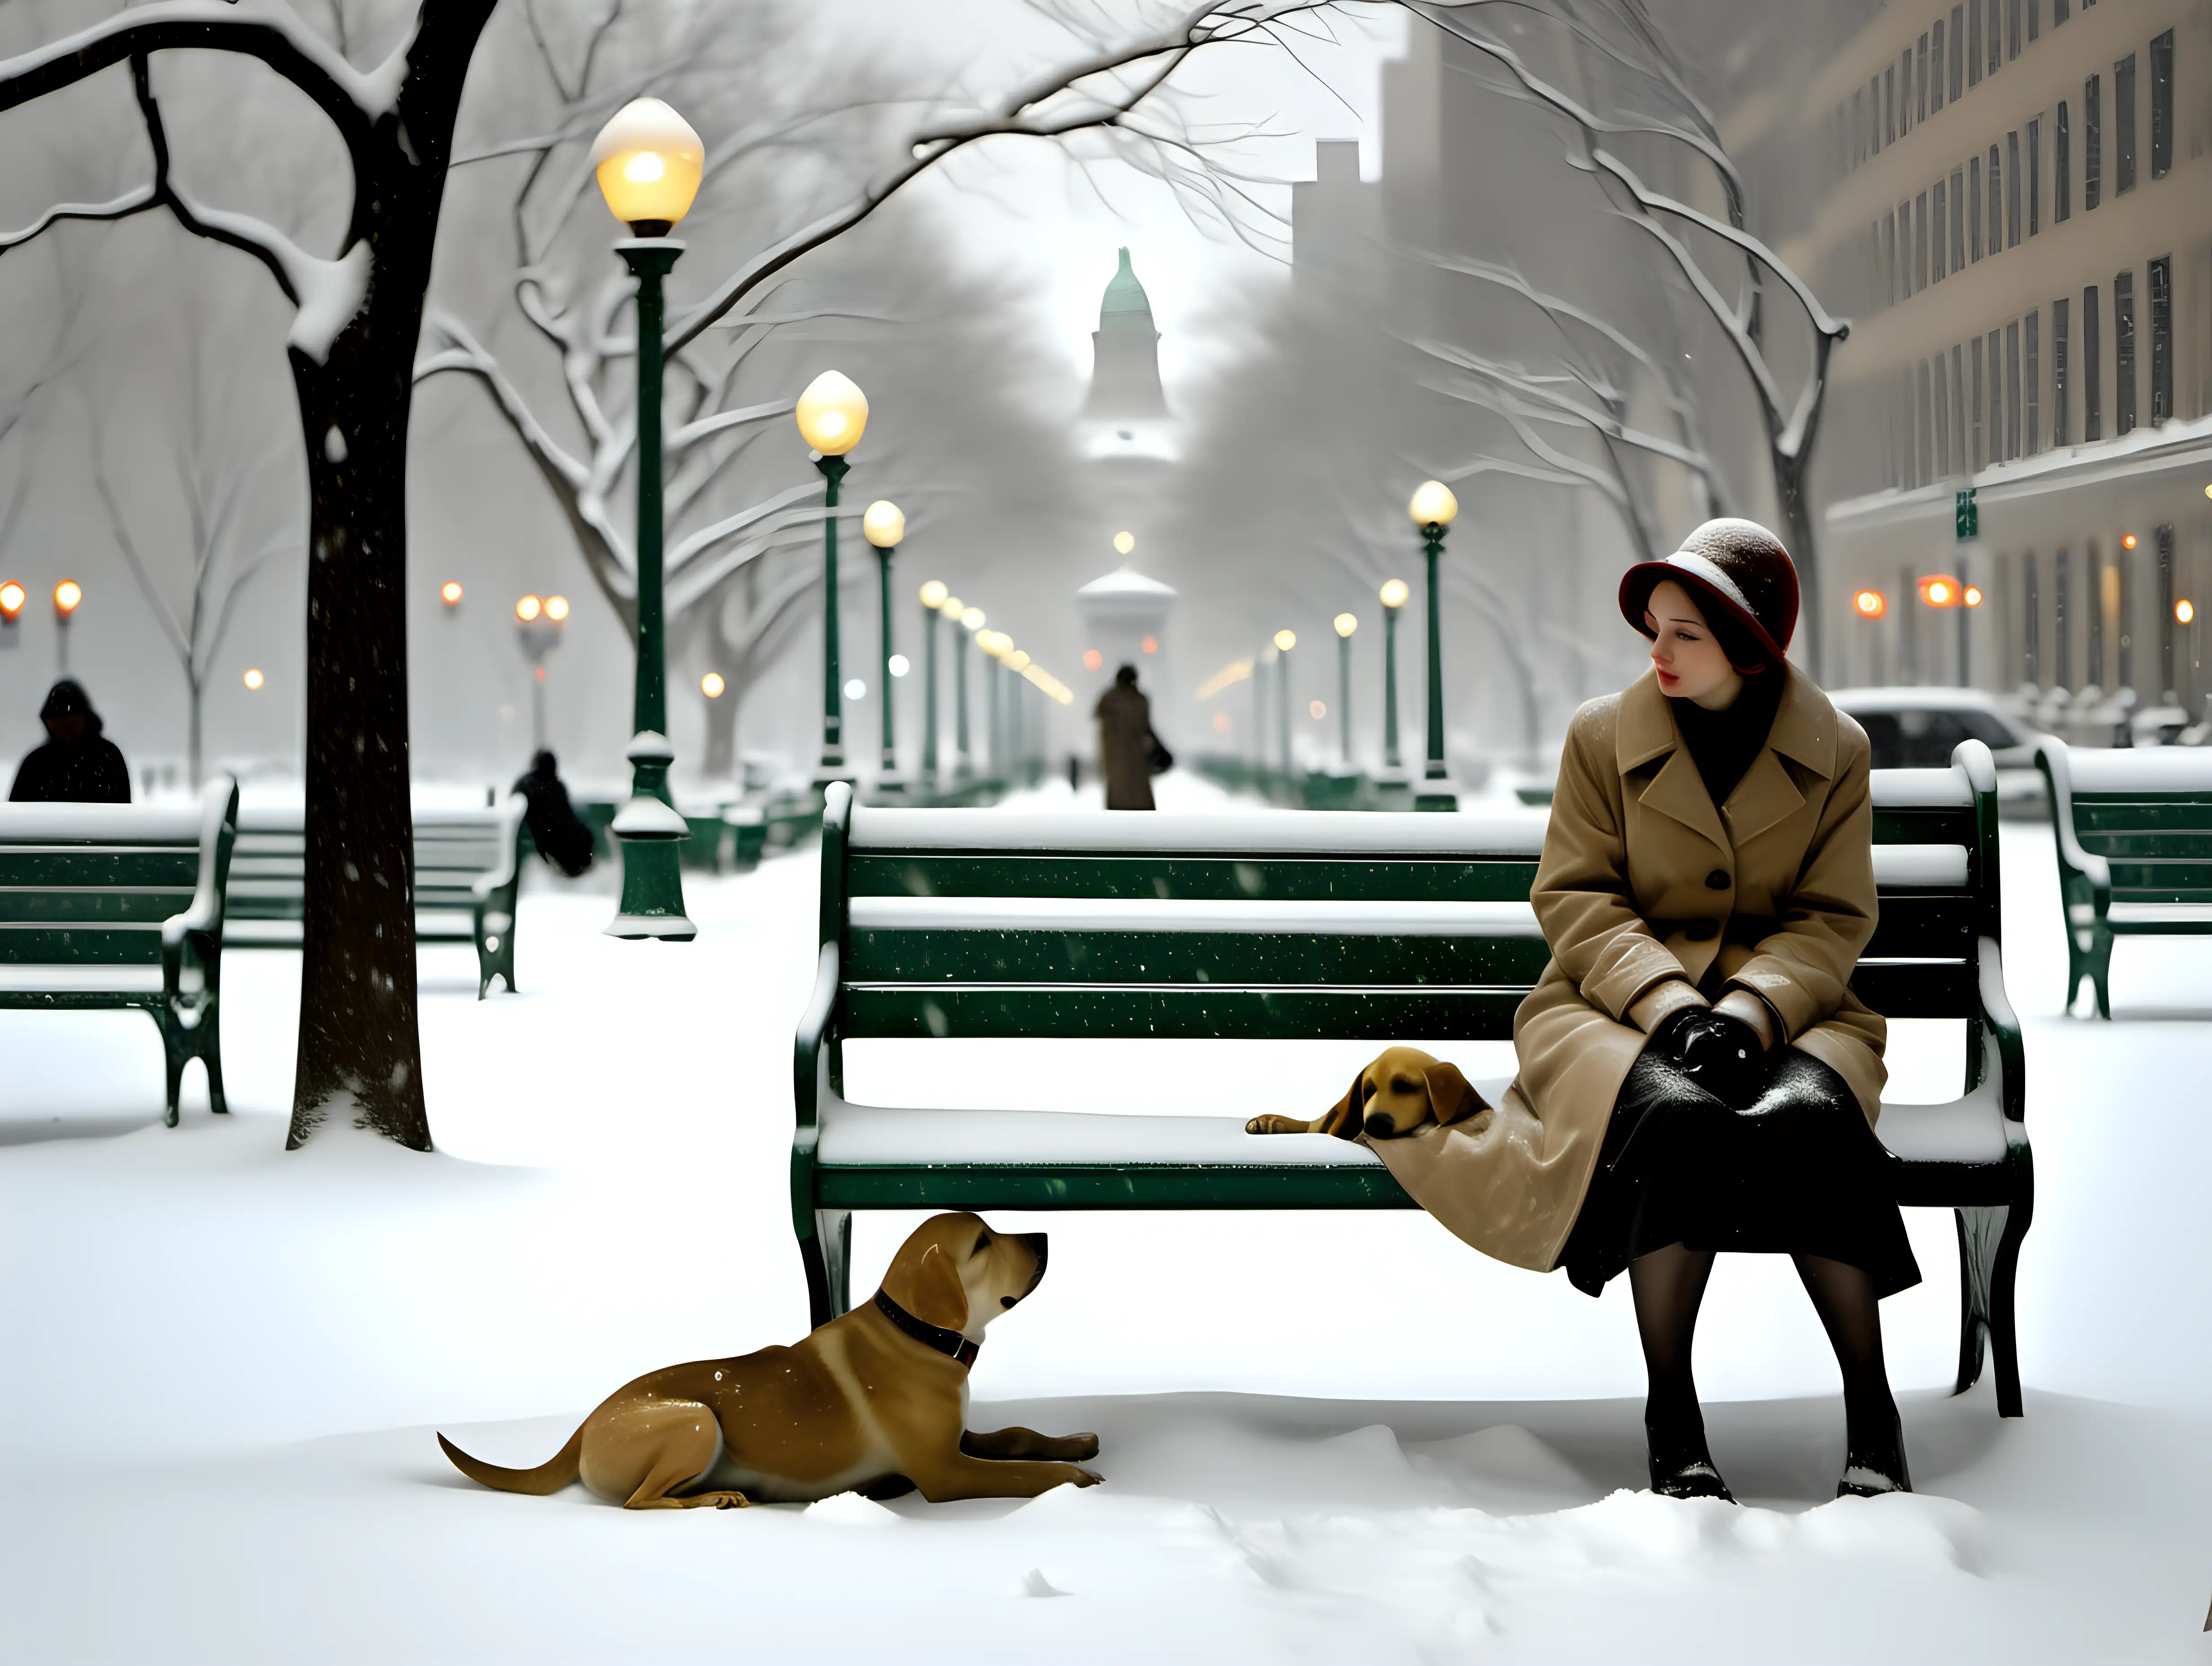 Lonely Woman with Puppy in Snow Storm at NYC Library Edward Hopper Style